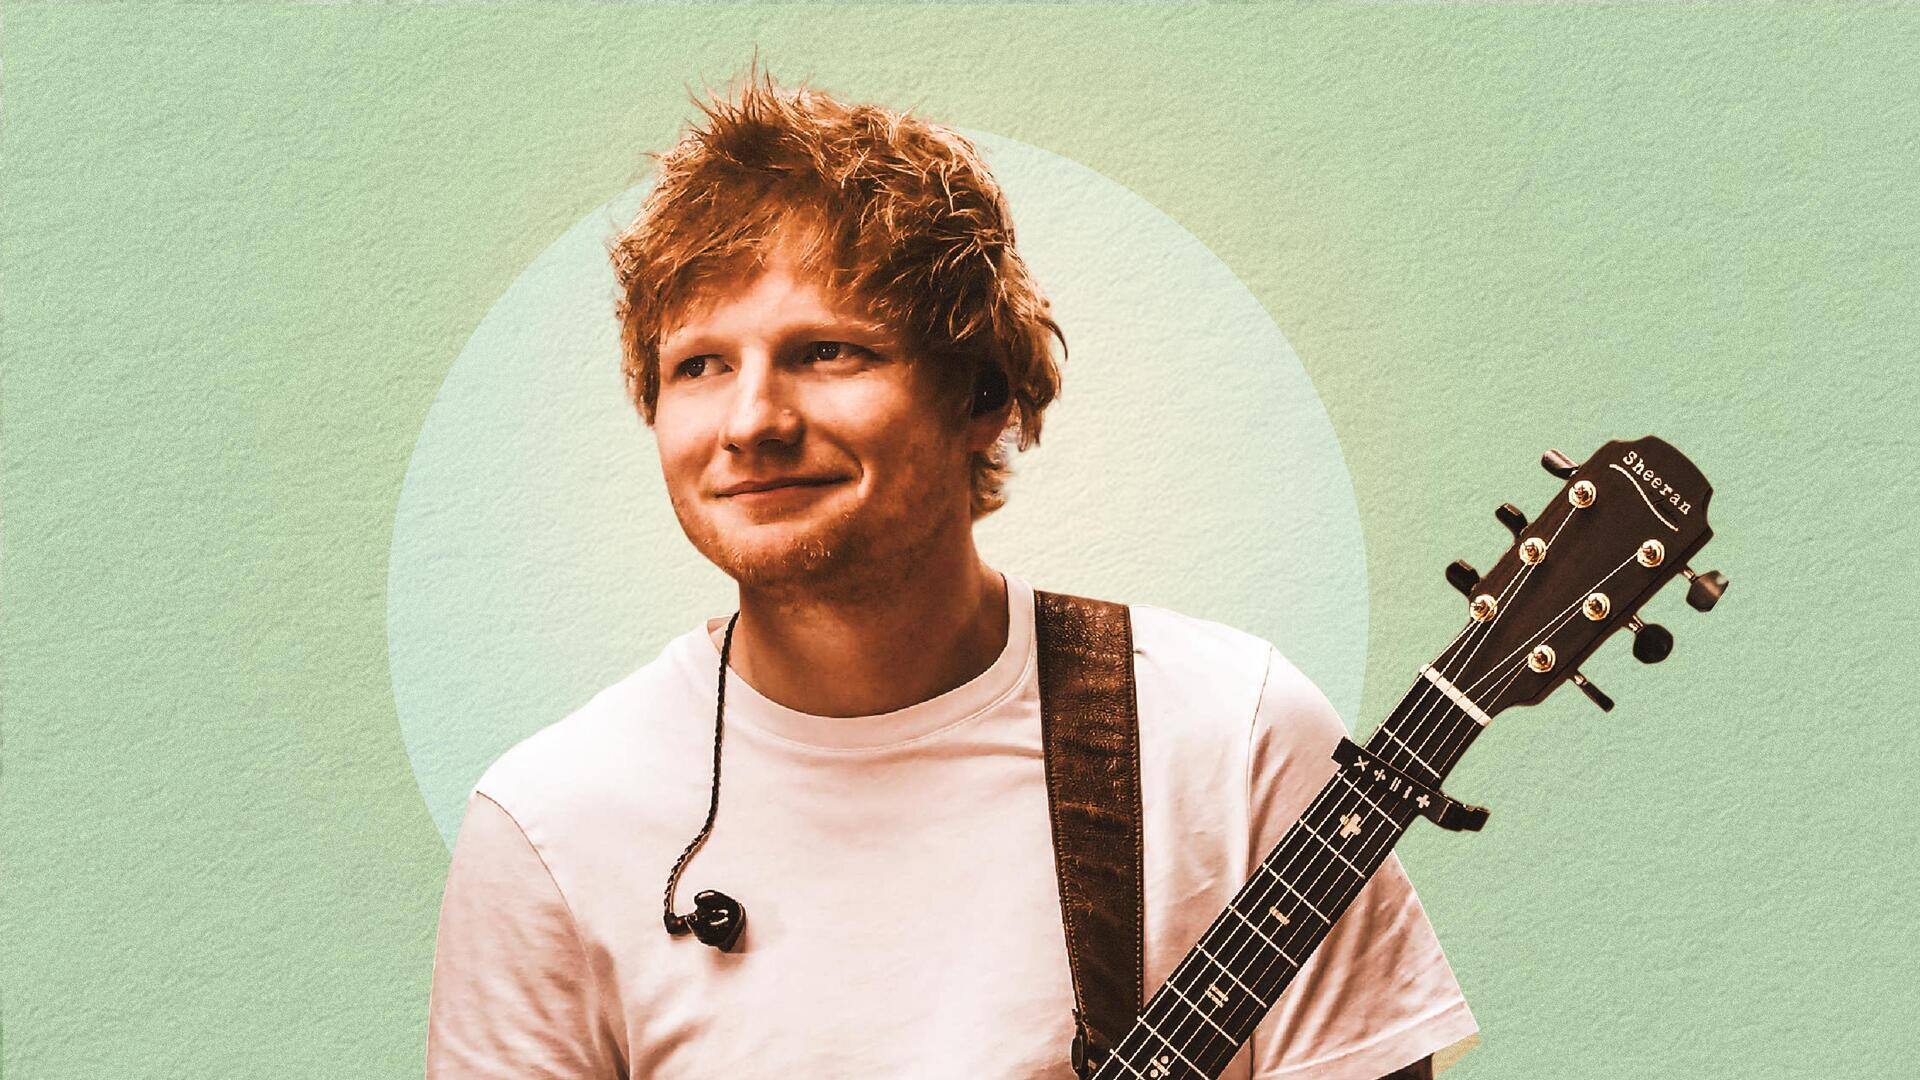 Ed Sheeran India concert: Booking details, where to get tickets 